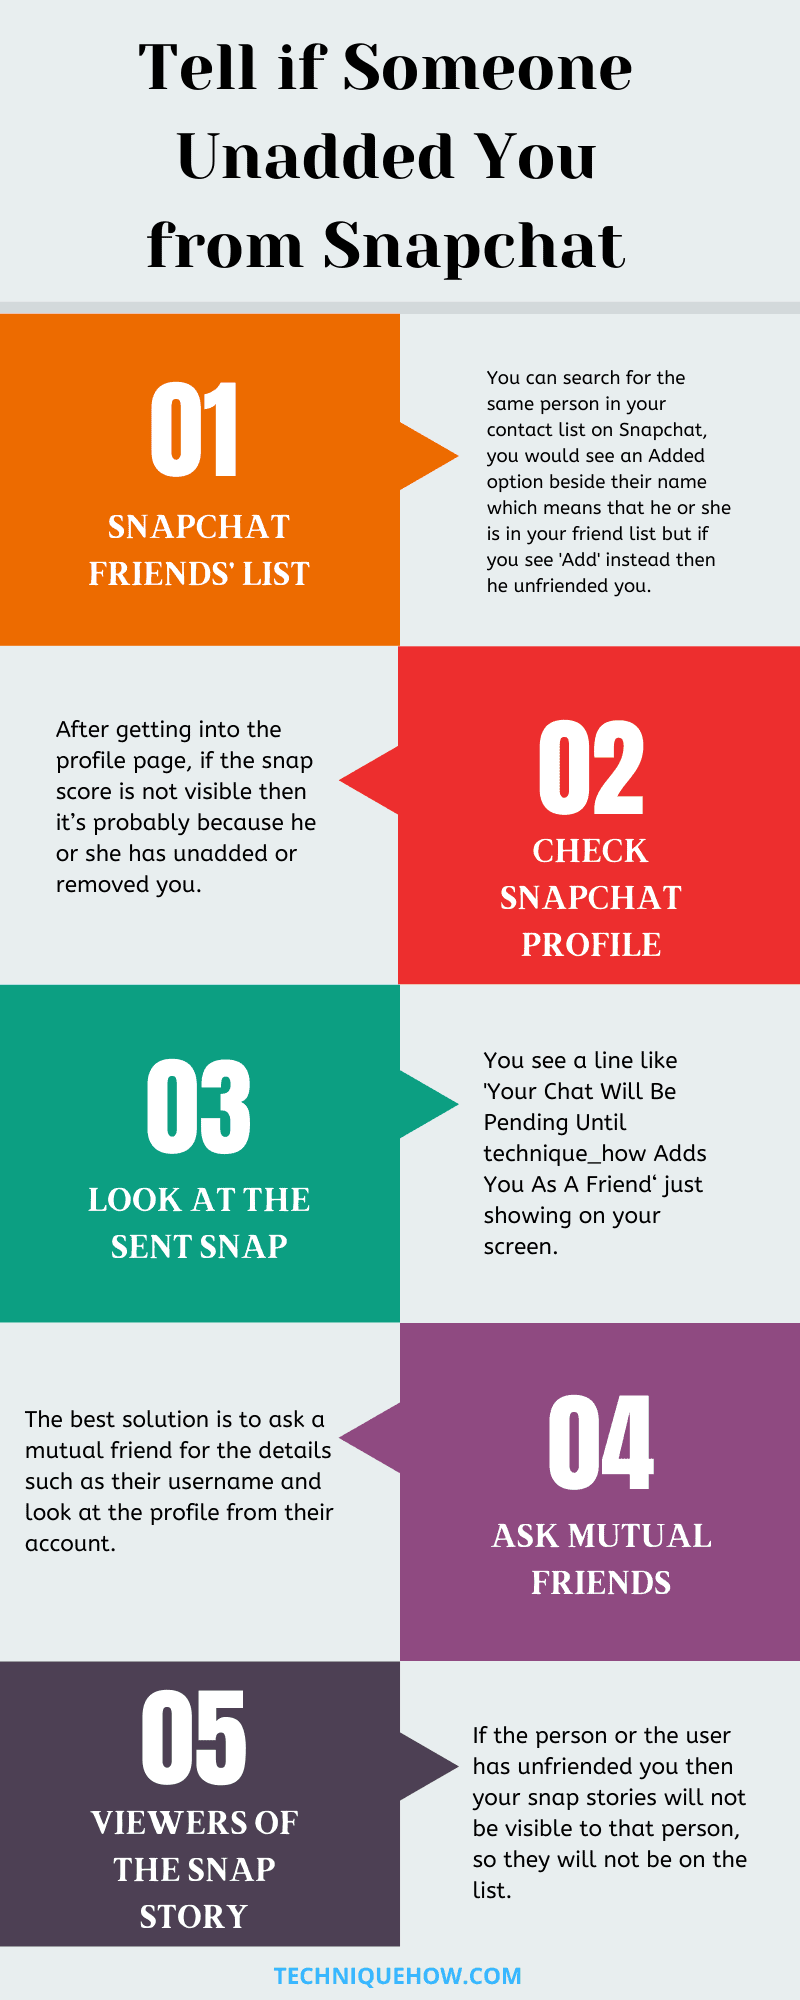 infographic_Tell if Someone Unadded You from Snapchat